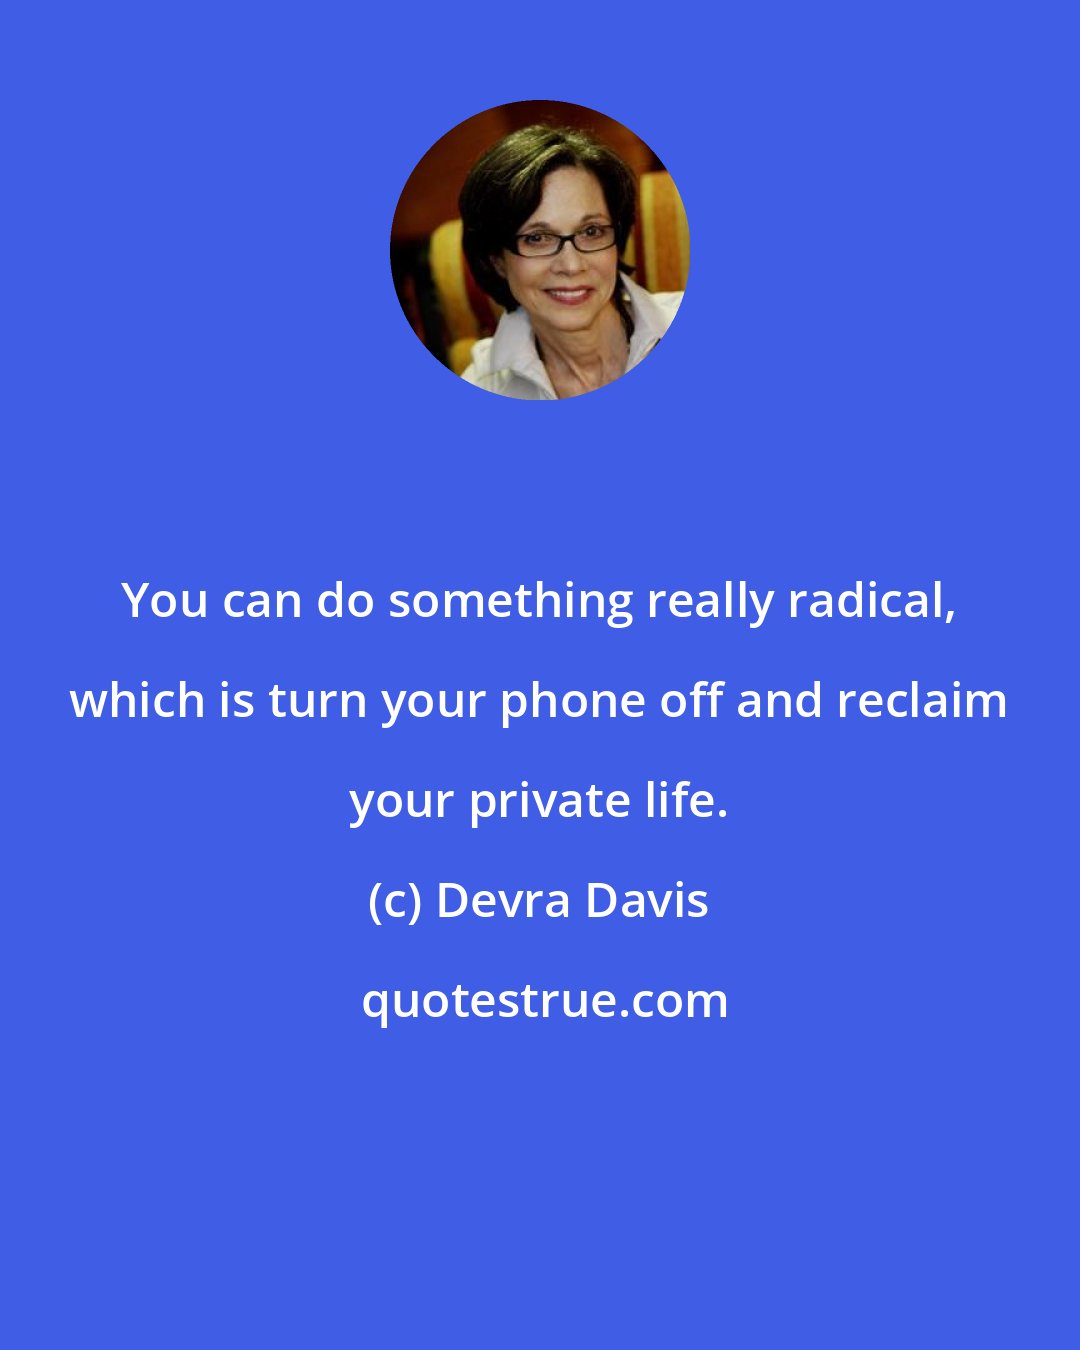 Devra Davis: You can do something really radical, which is turn your phone off and reclaim your private life.